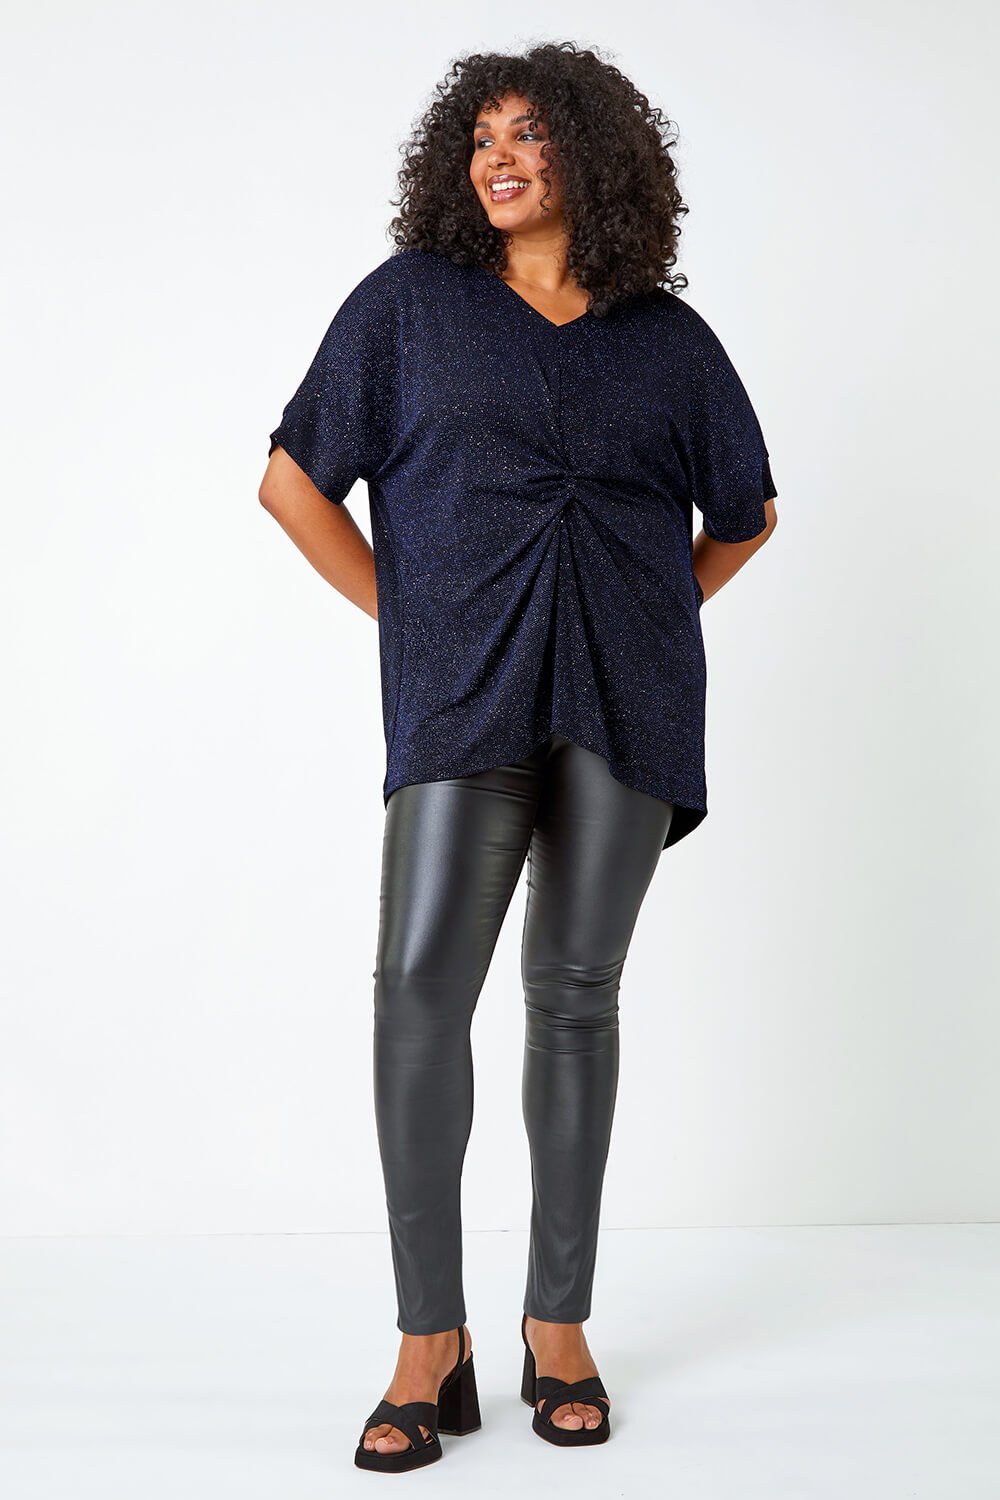 Royal Blue Curve Twist Front Glitter Stretch Top, Image 2 of 5